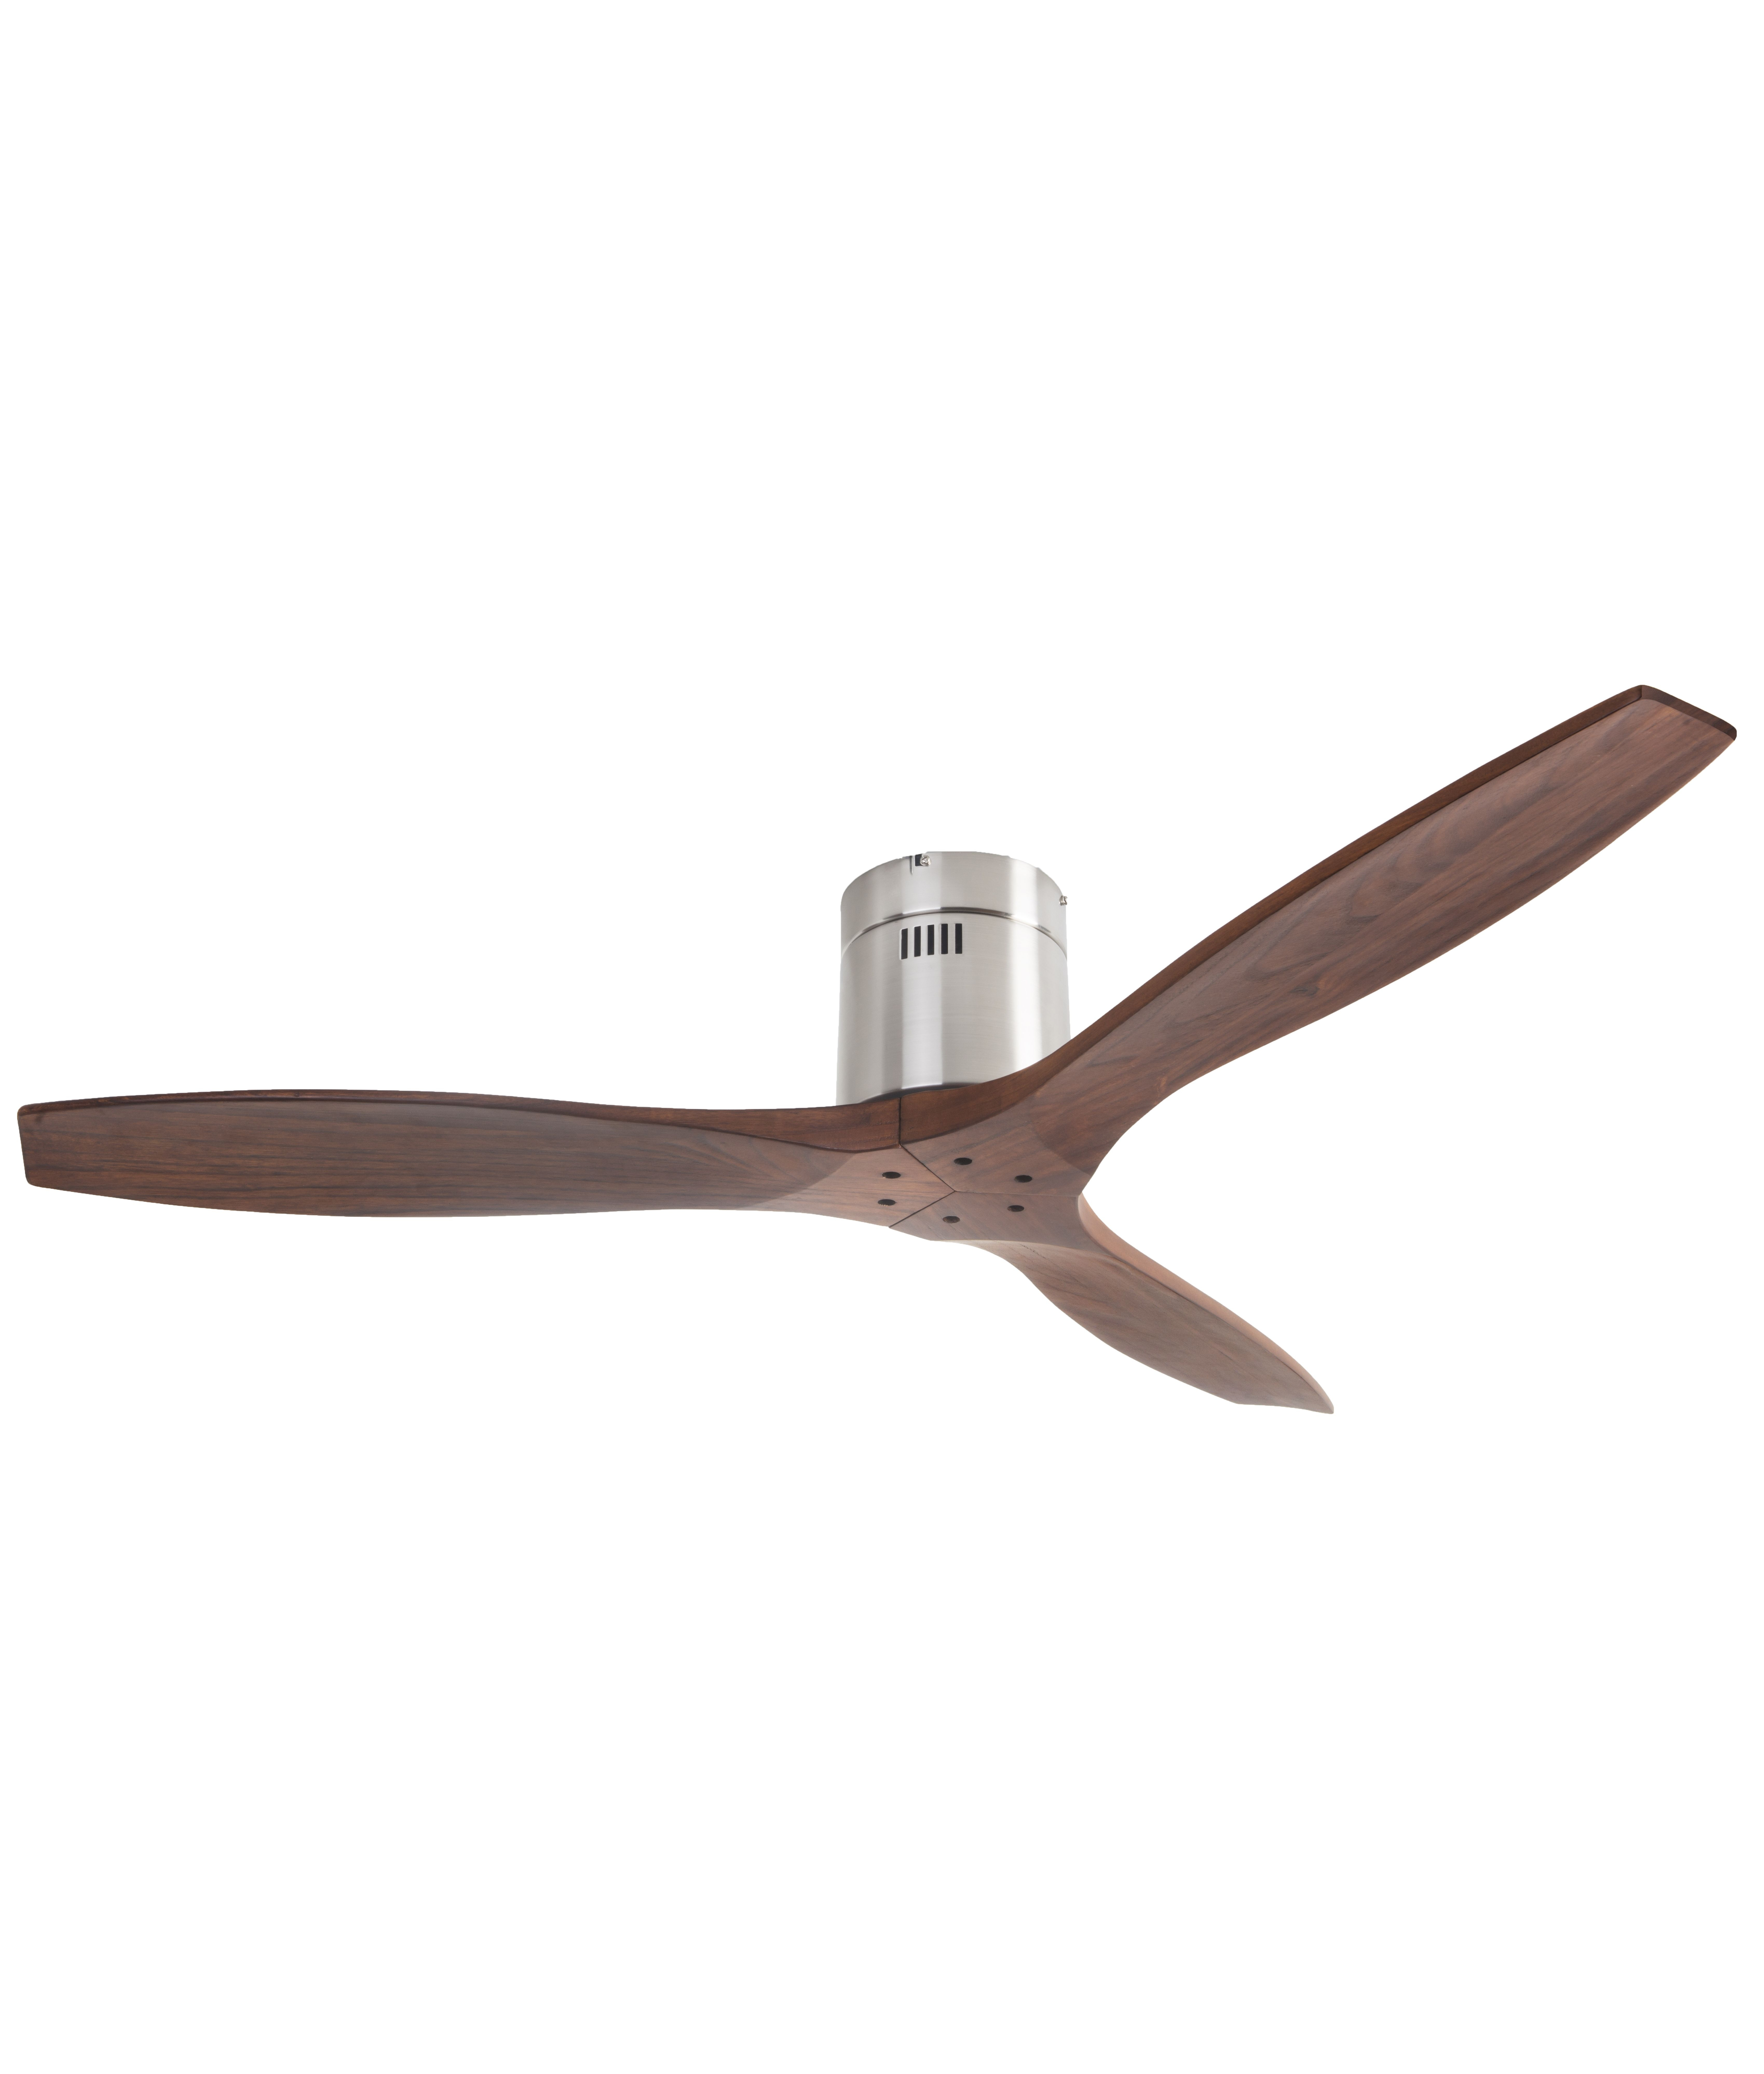 Wooden Propeller Style Blade Ceiling Fan With Modern Styling intended for sizing 6797 X 7990